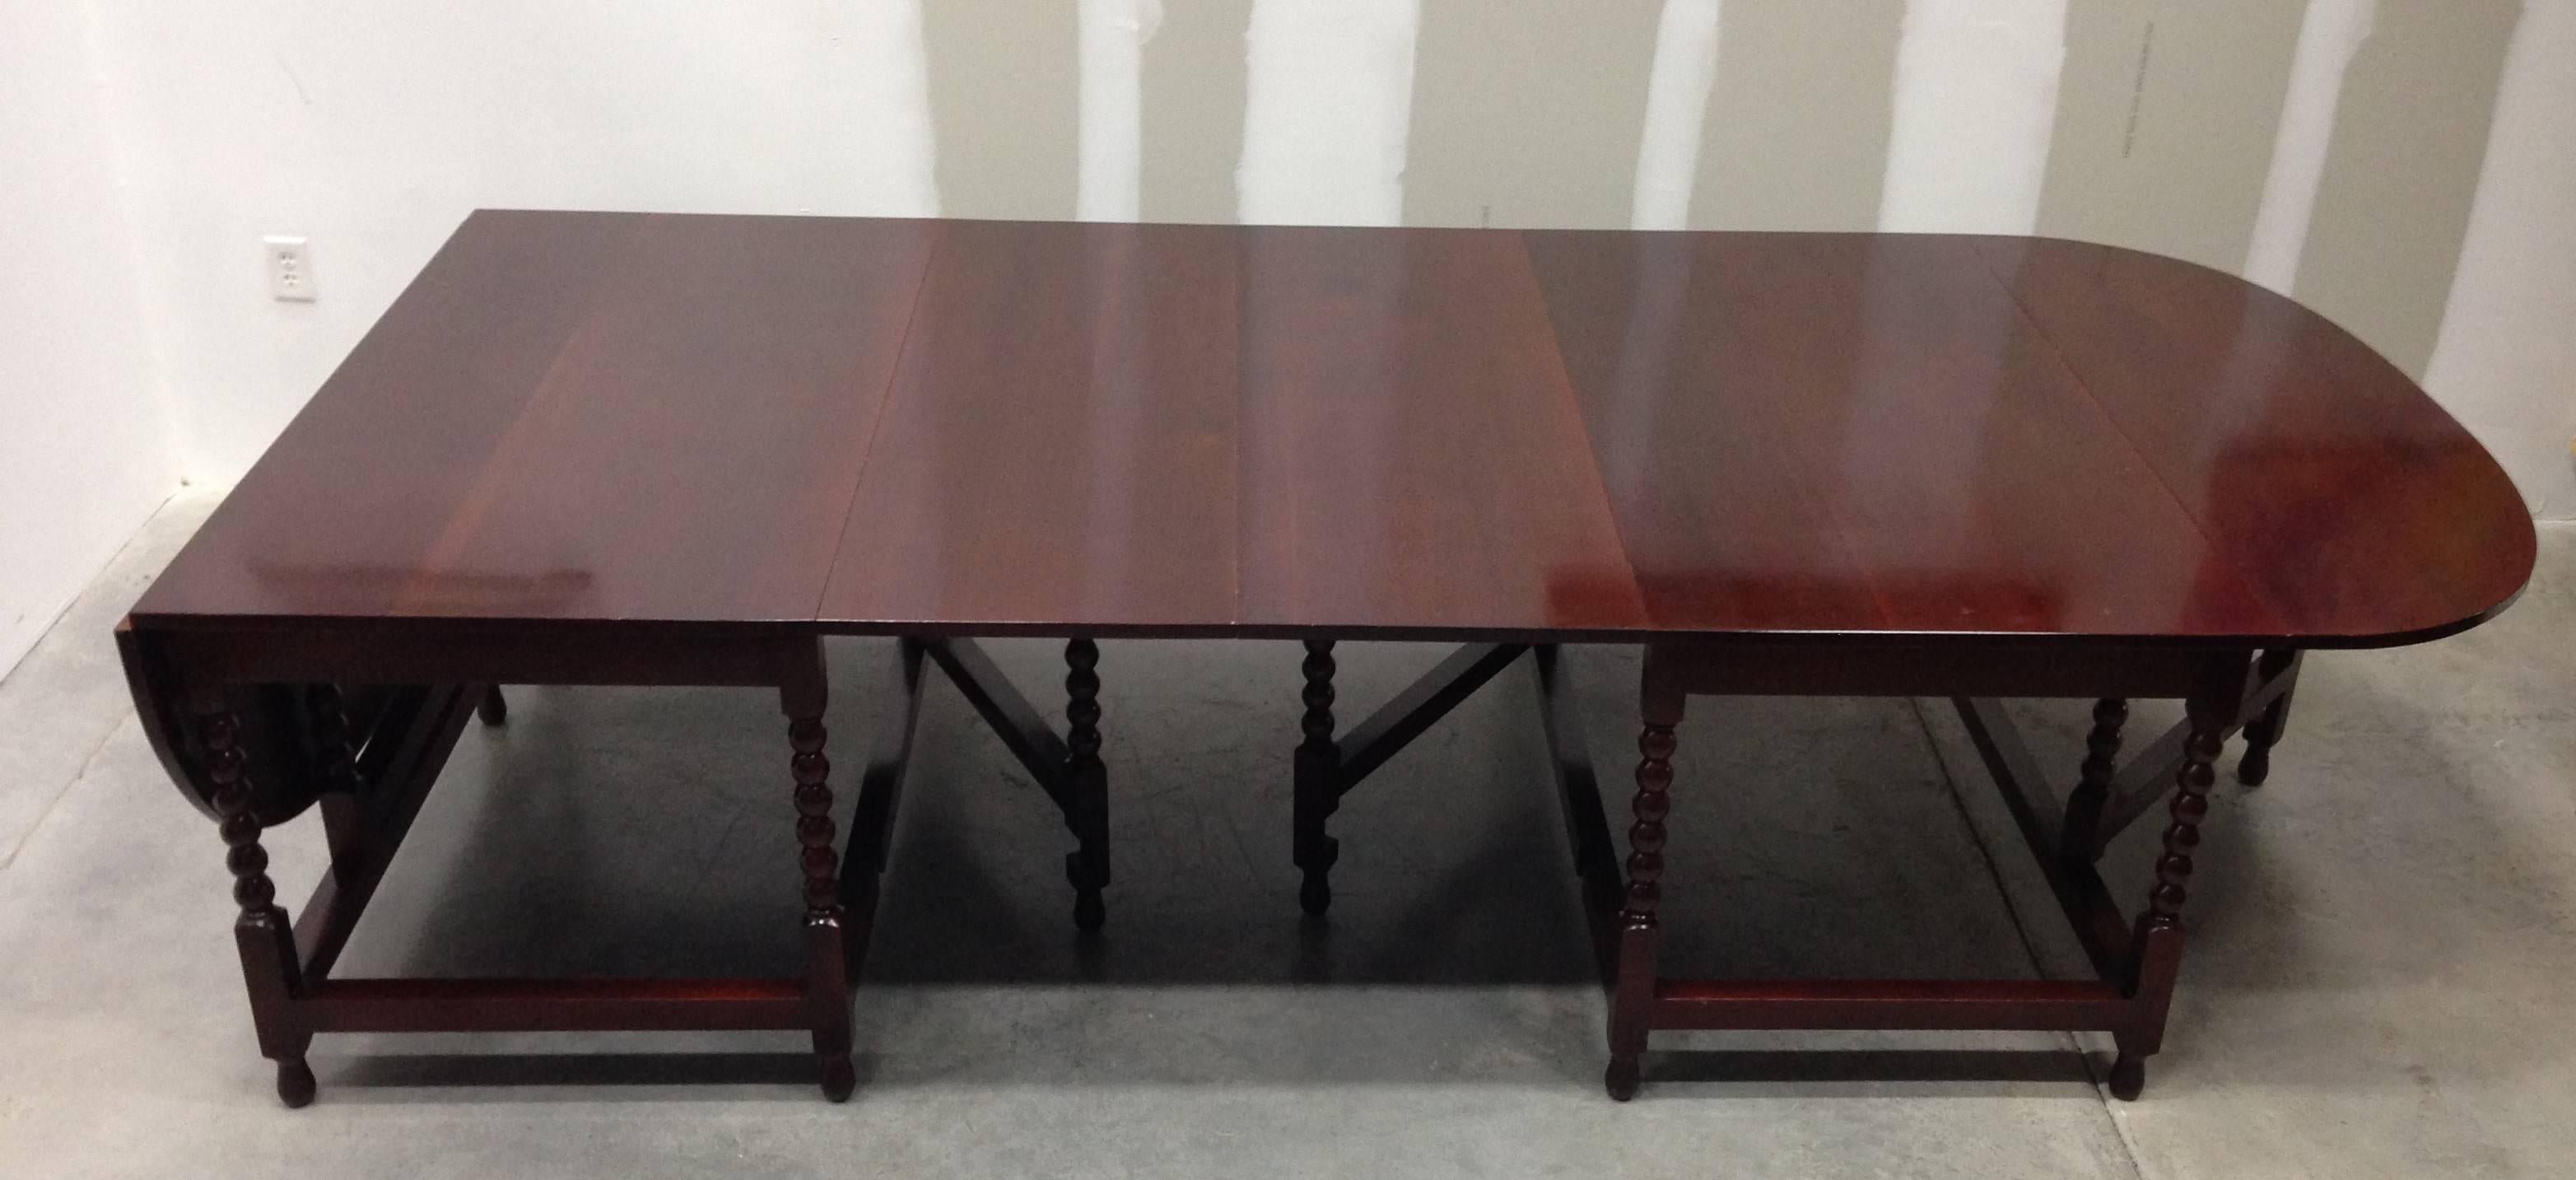 19th Century Late Regency Period Two-Part Dining Table or Conference Table in Mahogany For Sale